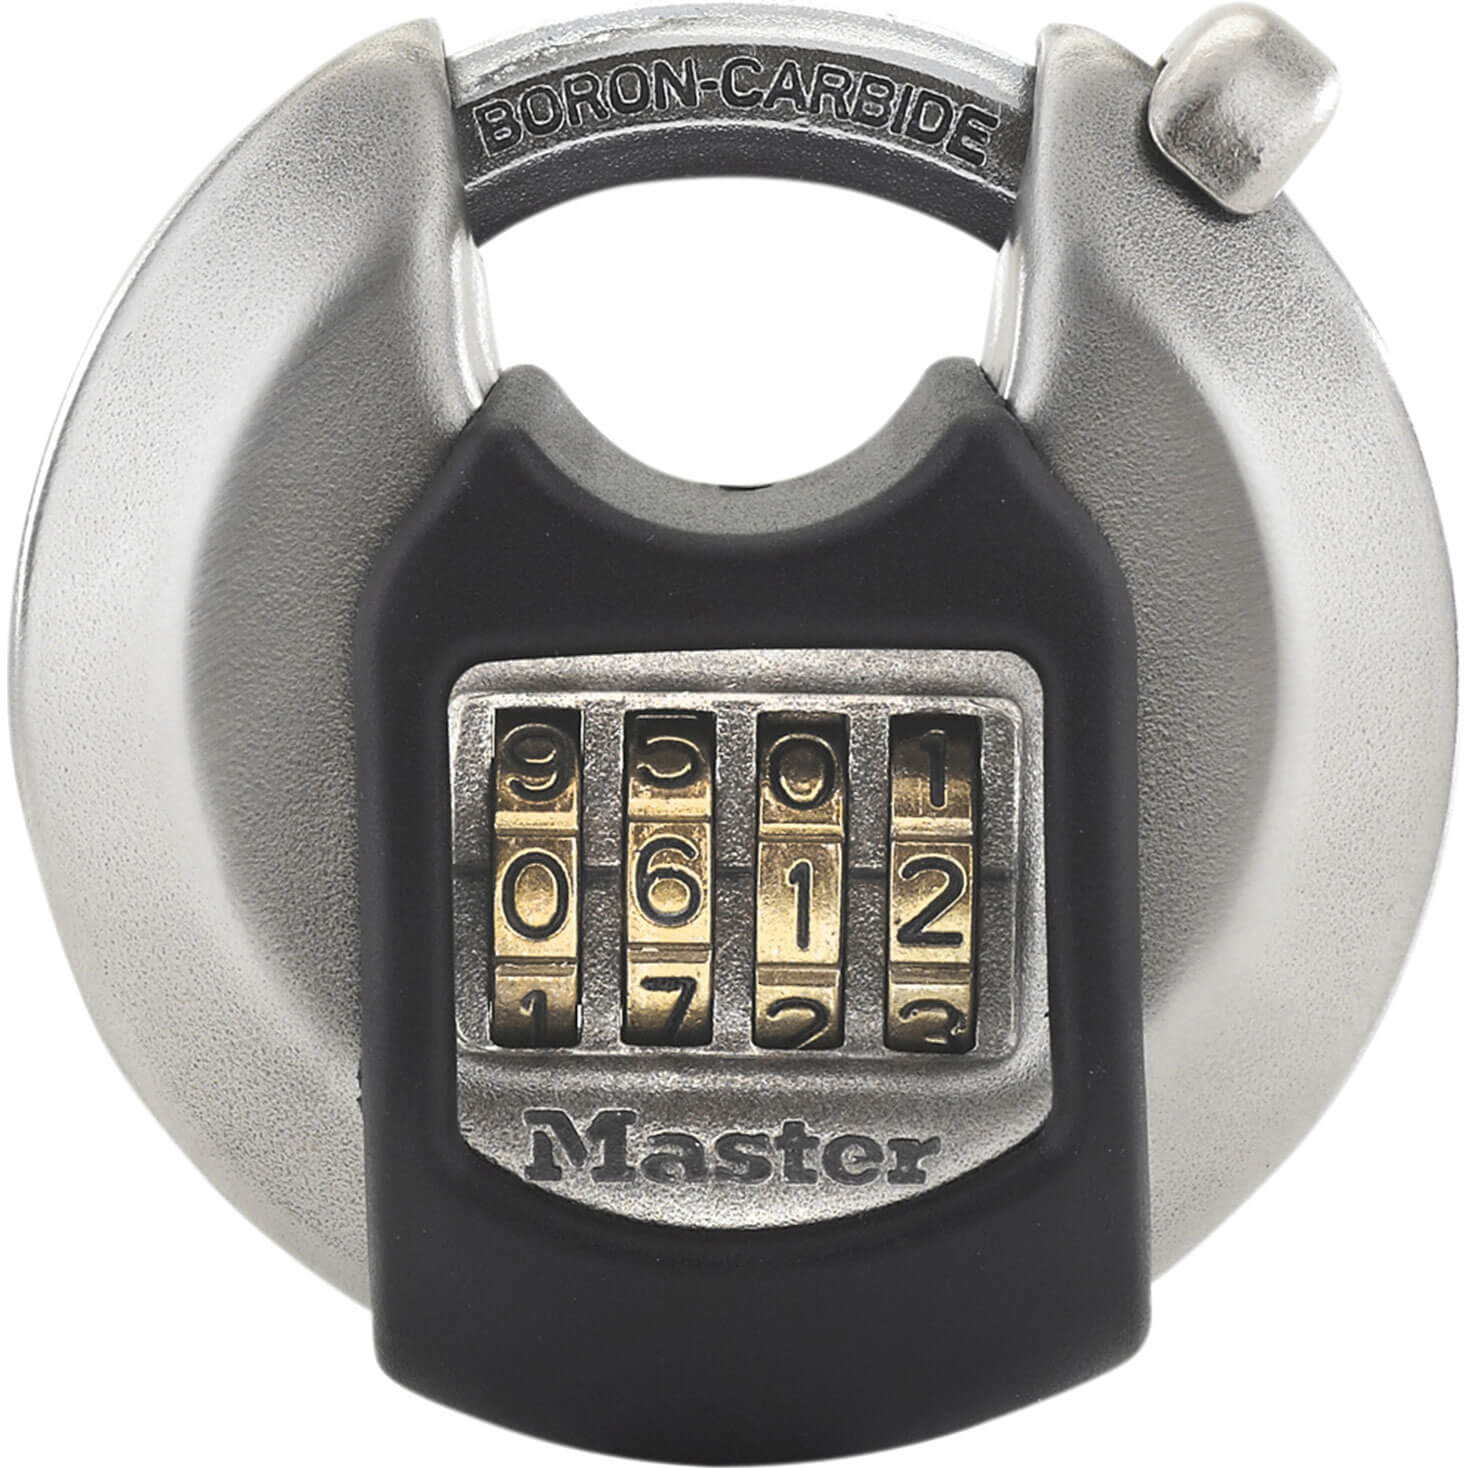 Image of Masterlock Excell Stainless Steel Discus Combination Padlock 70mm Standard